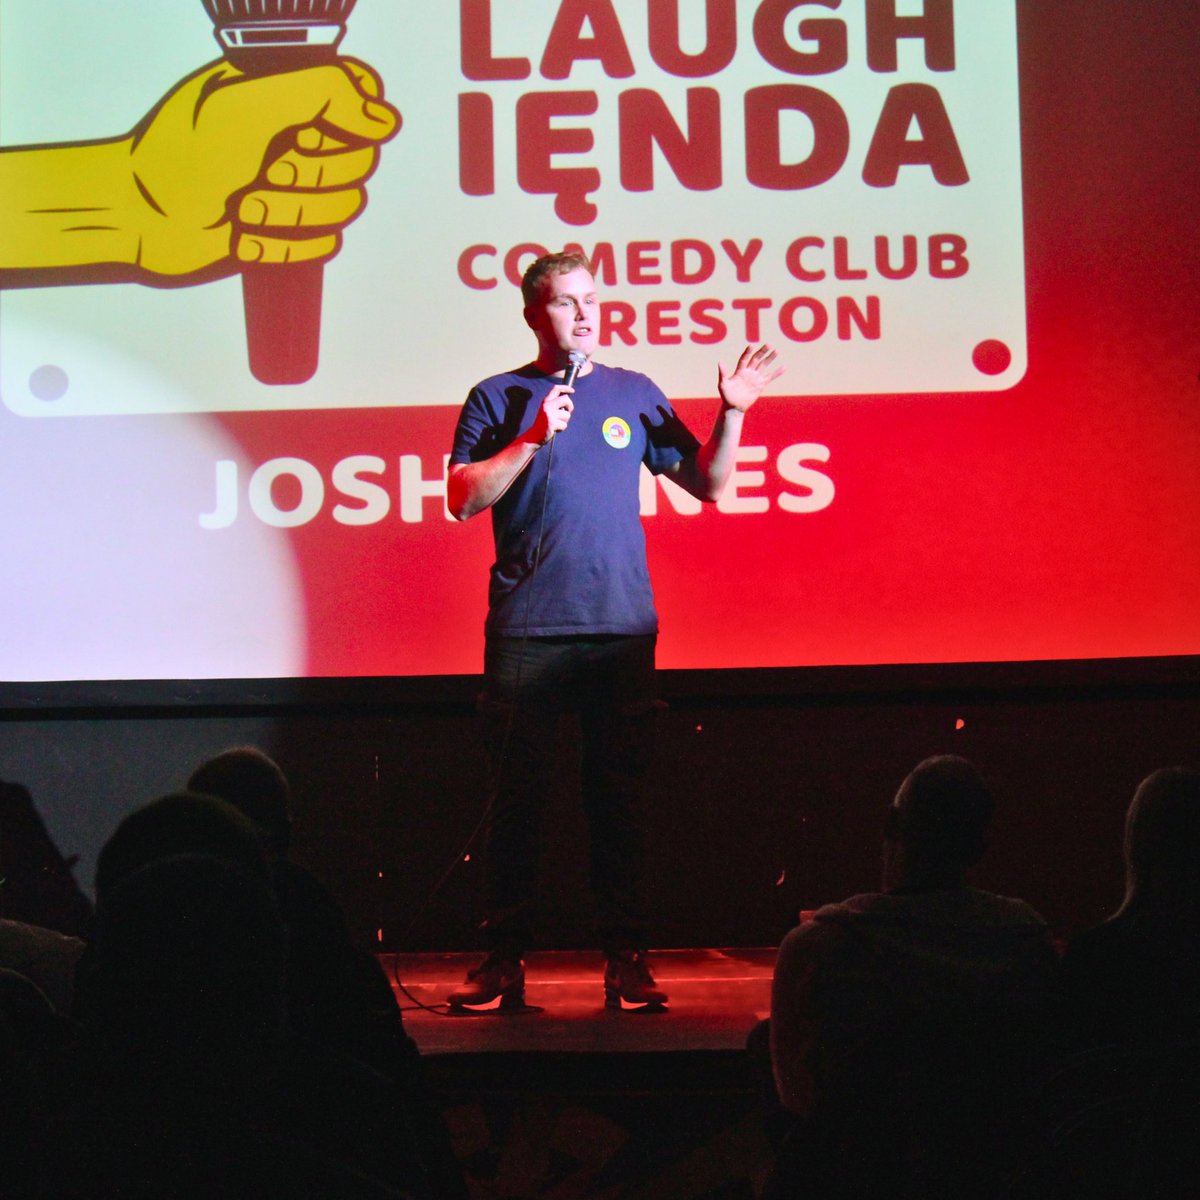 It’s just 4 days until our last visit of the year to @NewContinental and there’s only a handful of tickets left! 🤣🎤🎄

Get them whilst you still can!
 laughienda.com 🎟️

#theconti #thecontinental #laughienda #laughiendacomedyclub #comedy